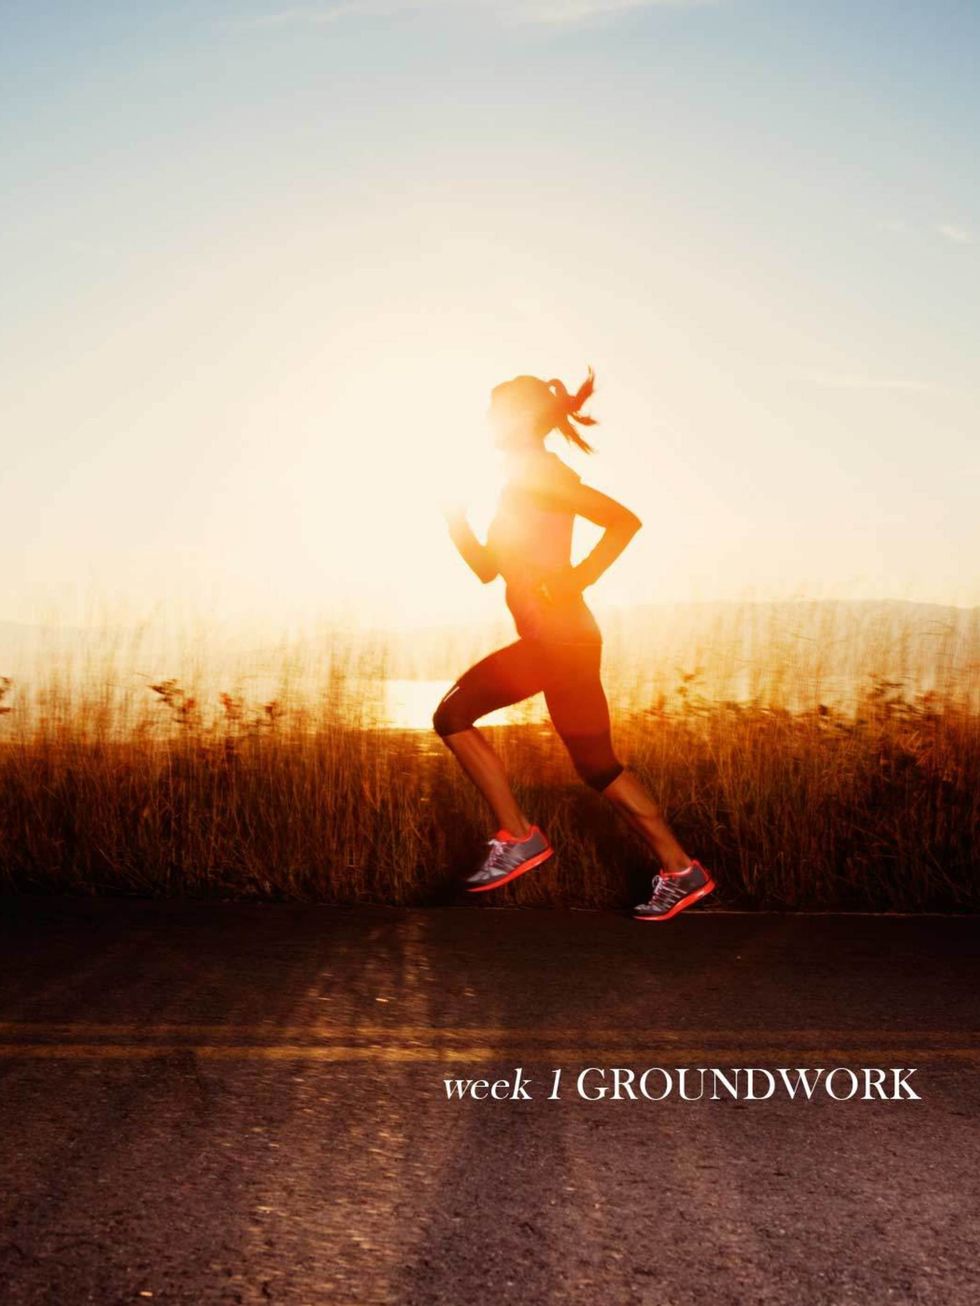 <p><strong>Week 1: Groundwork</strong></p>

<p><strong>Monday  Gait Analysis </strong>An expert looks in depth at the way you run to see where you need extra support. This will help you to find your perfect running trainers and minimise chances of injury